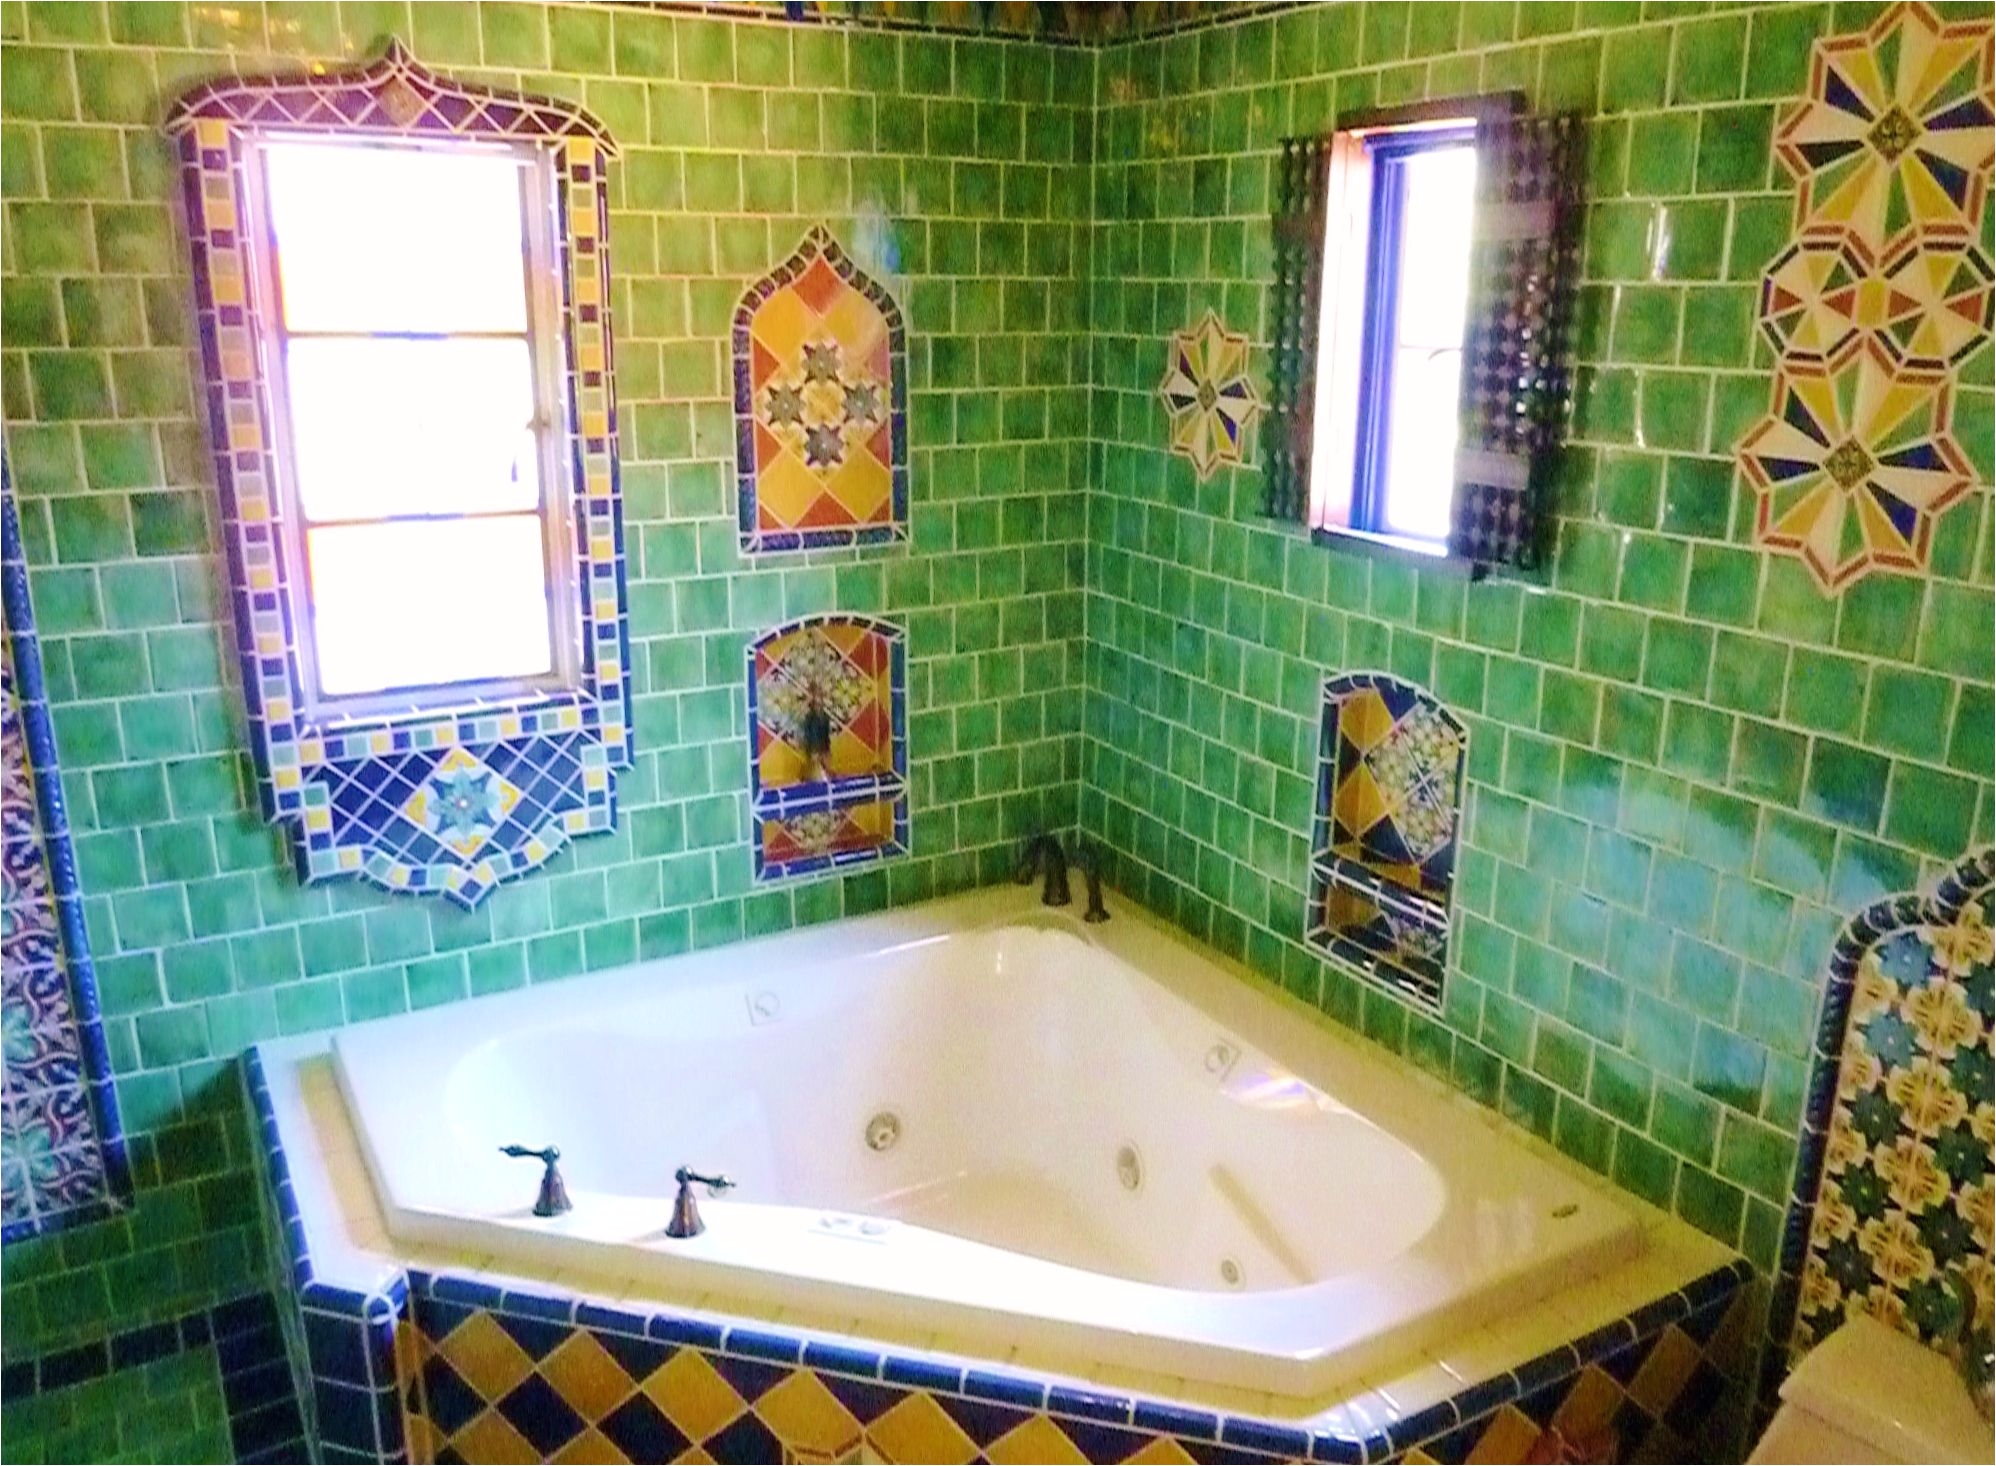 This might be a little over the top but we like the idea of brining some Mexican tiles and details into the bathrooms